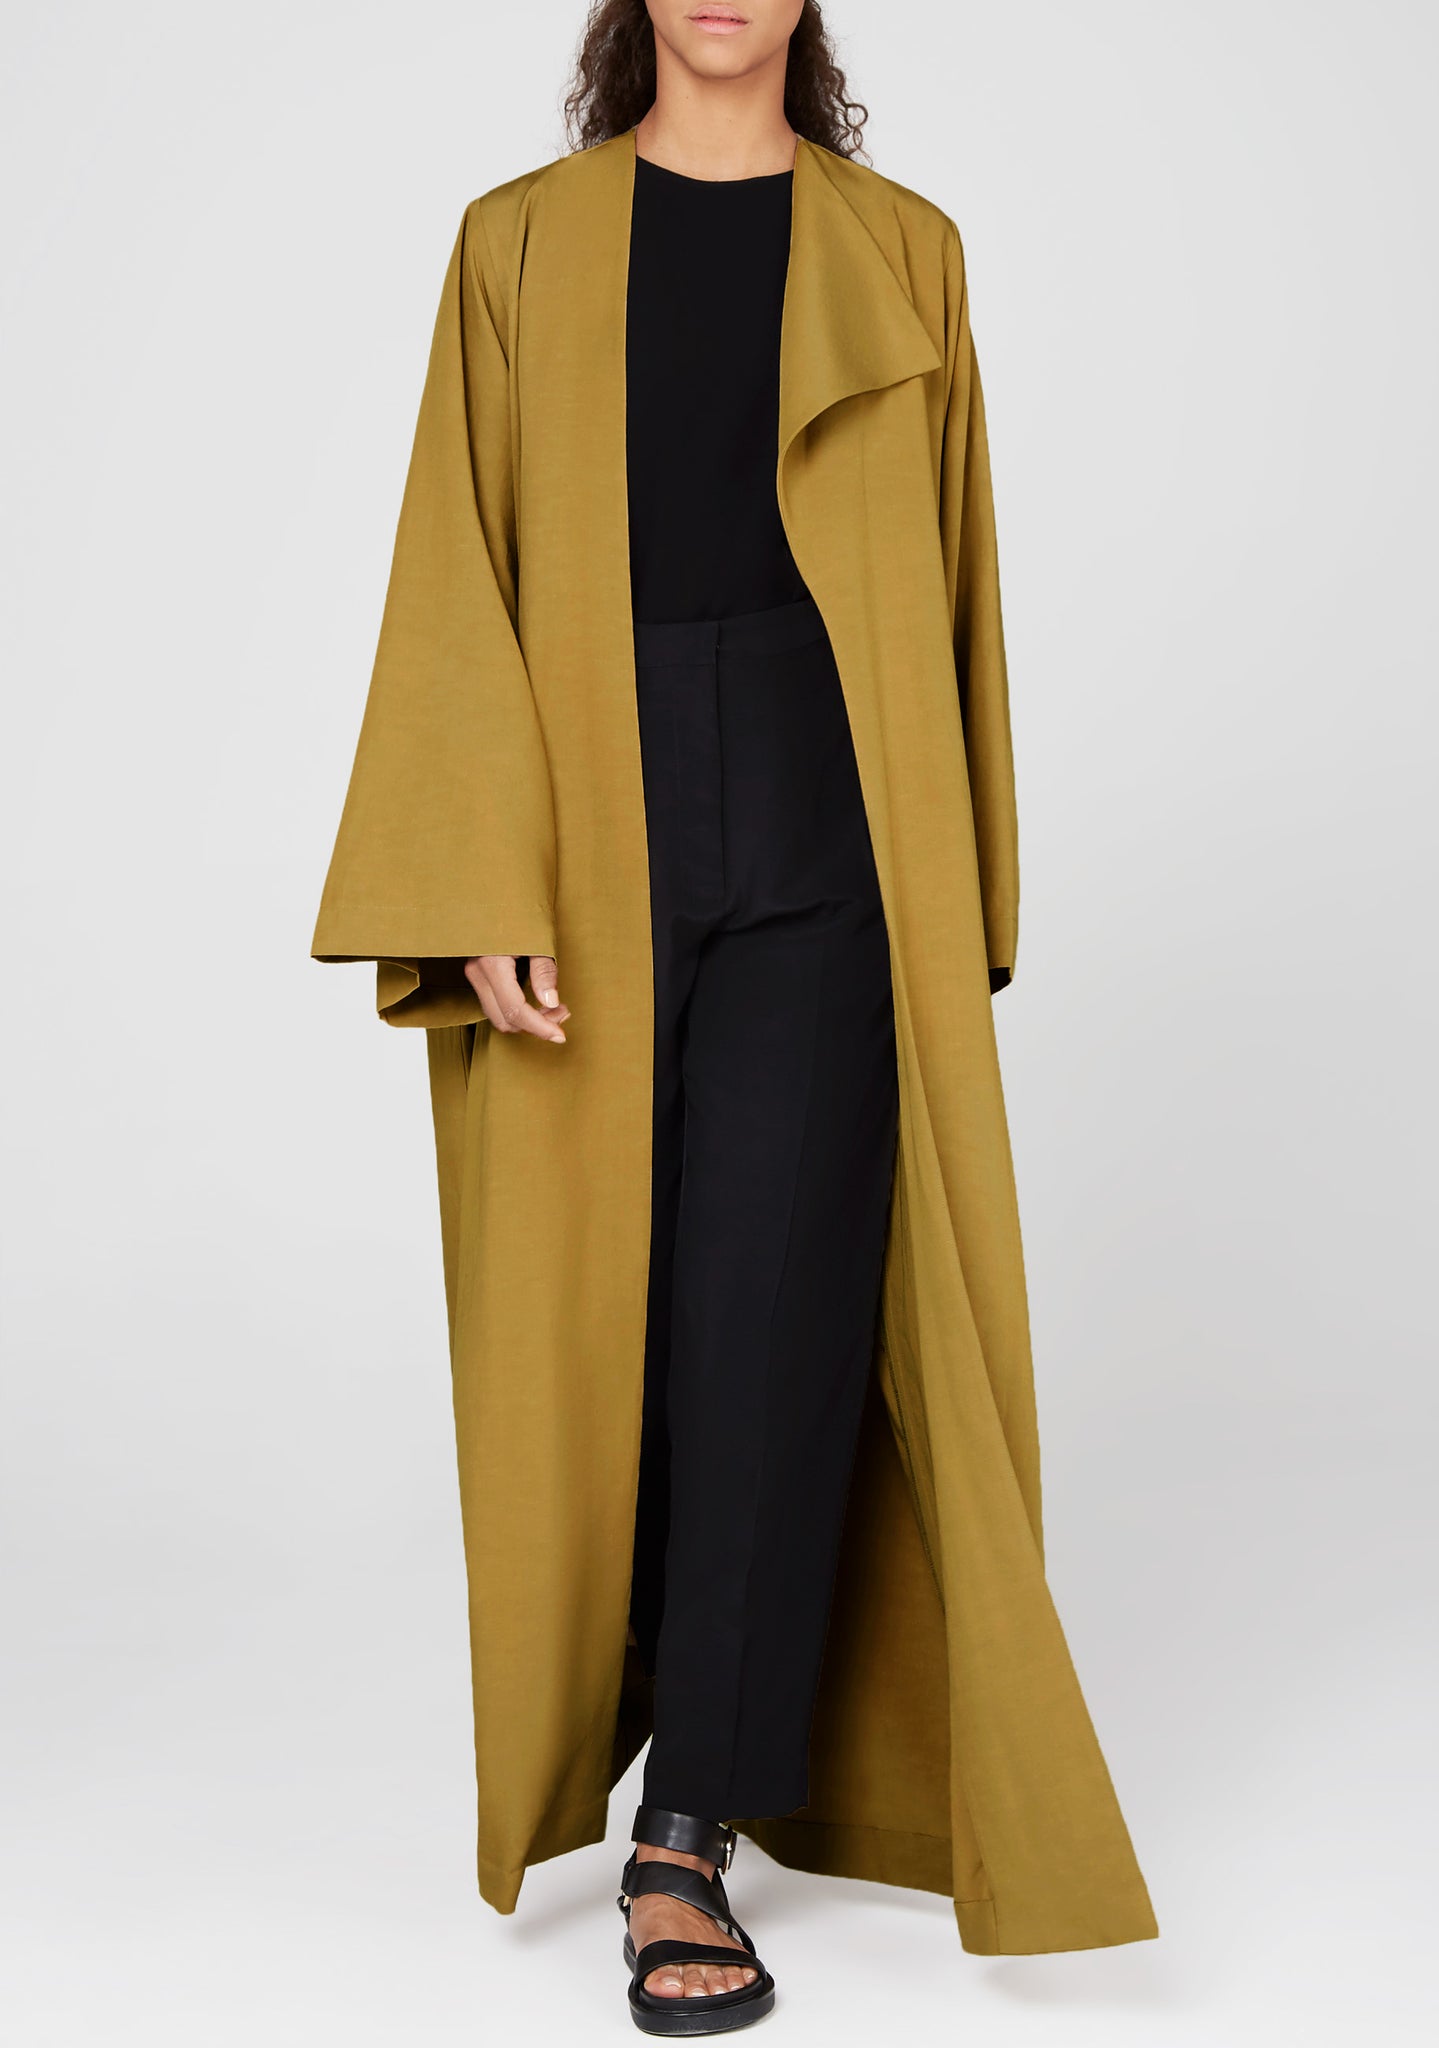 Bouguessa - Minimal Loose Belted Coat